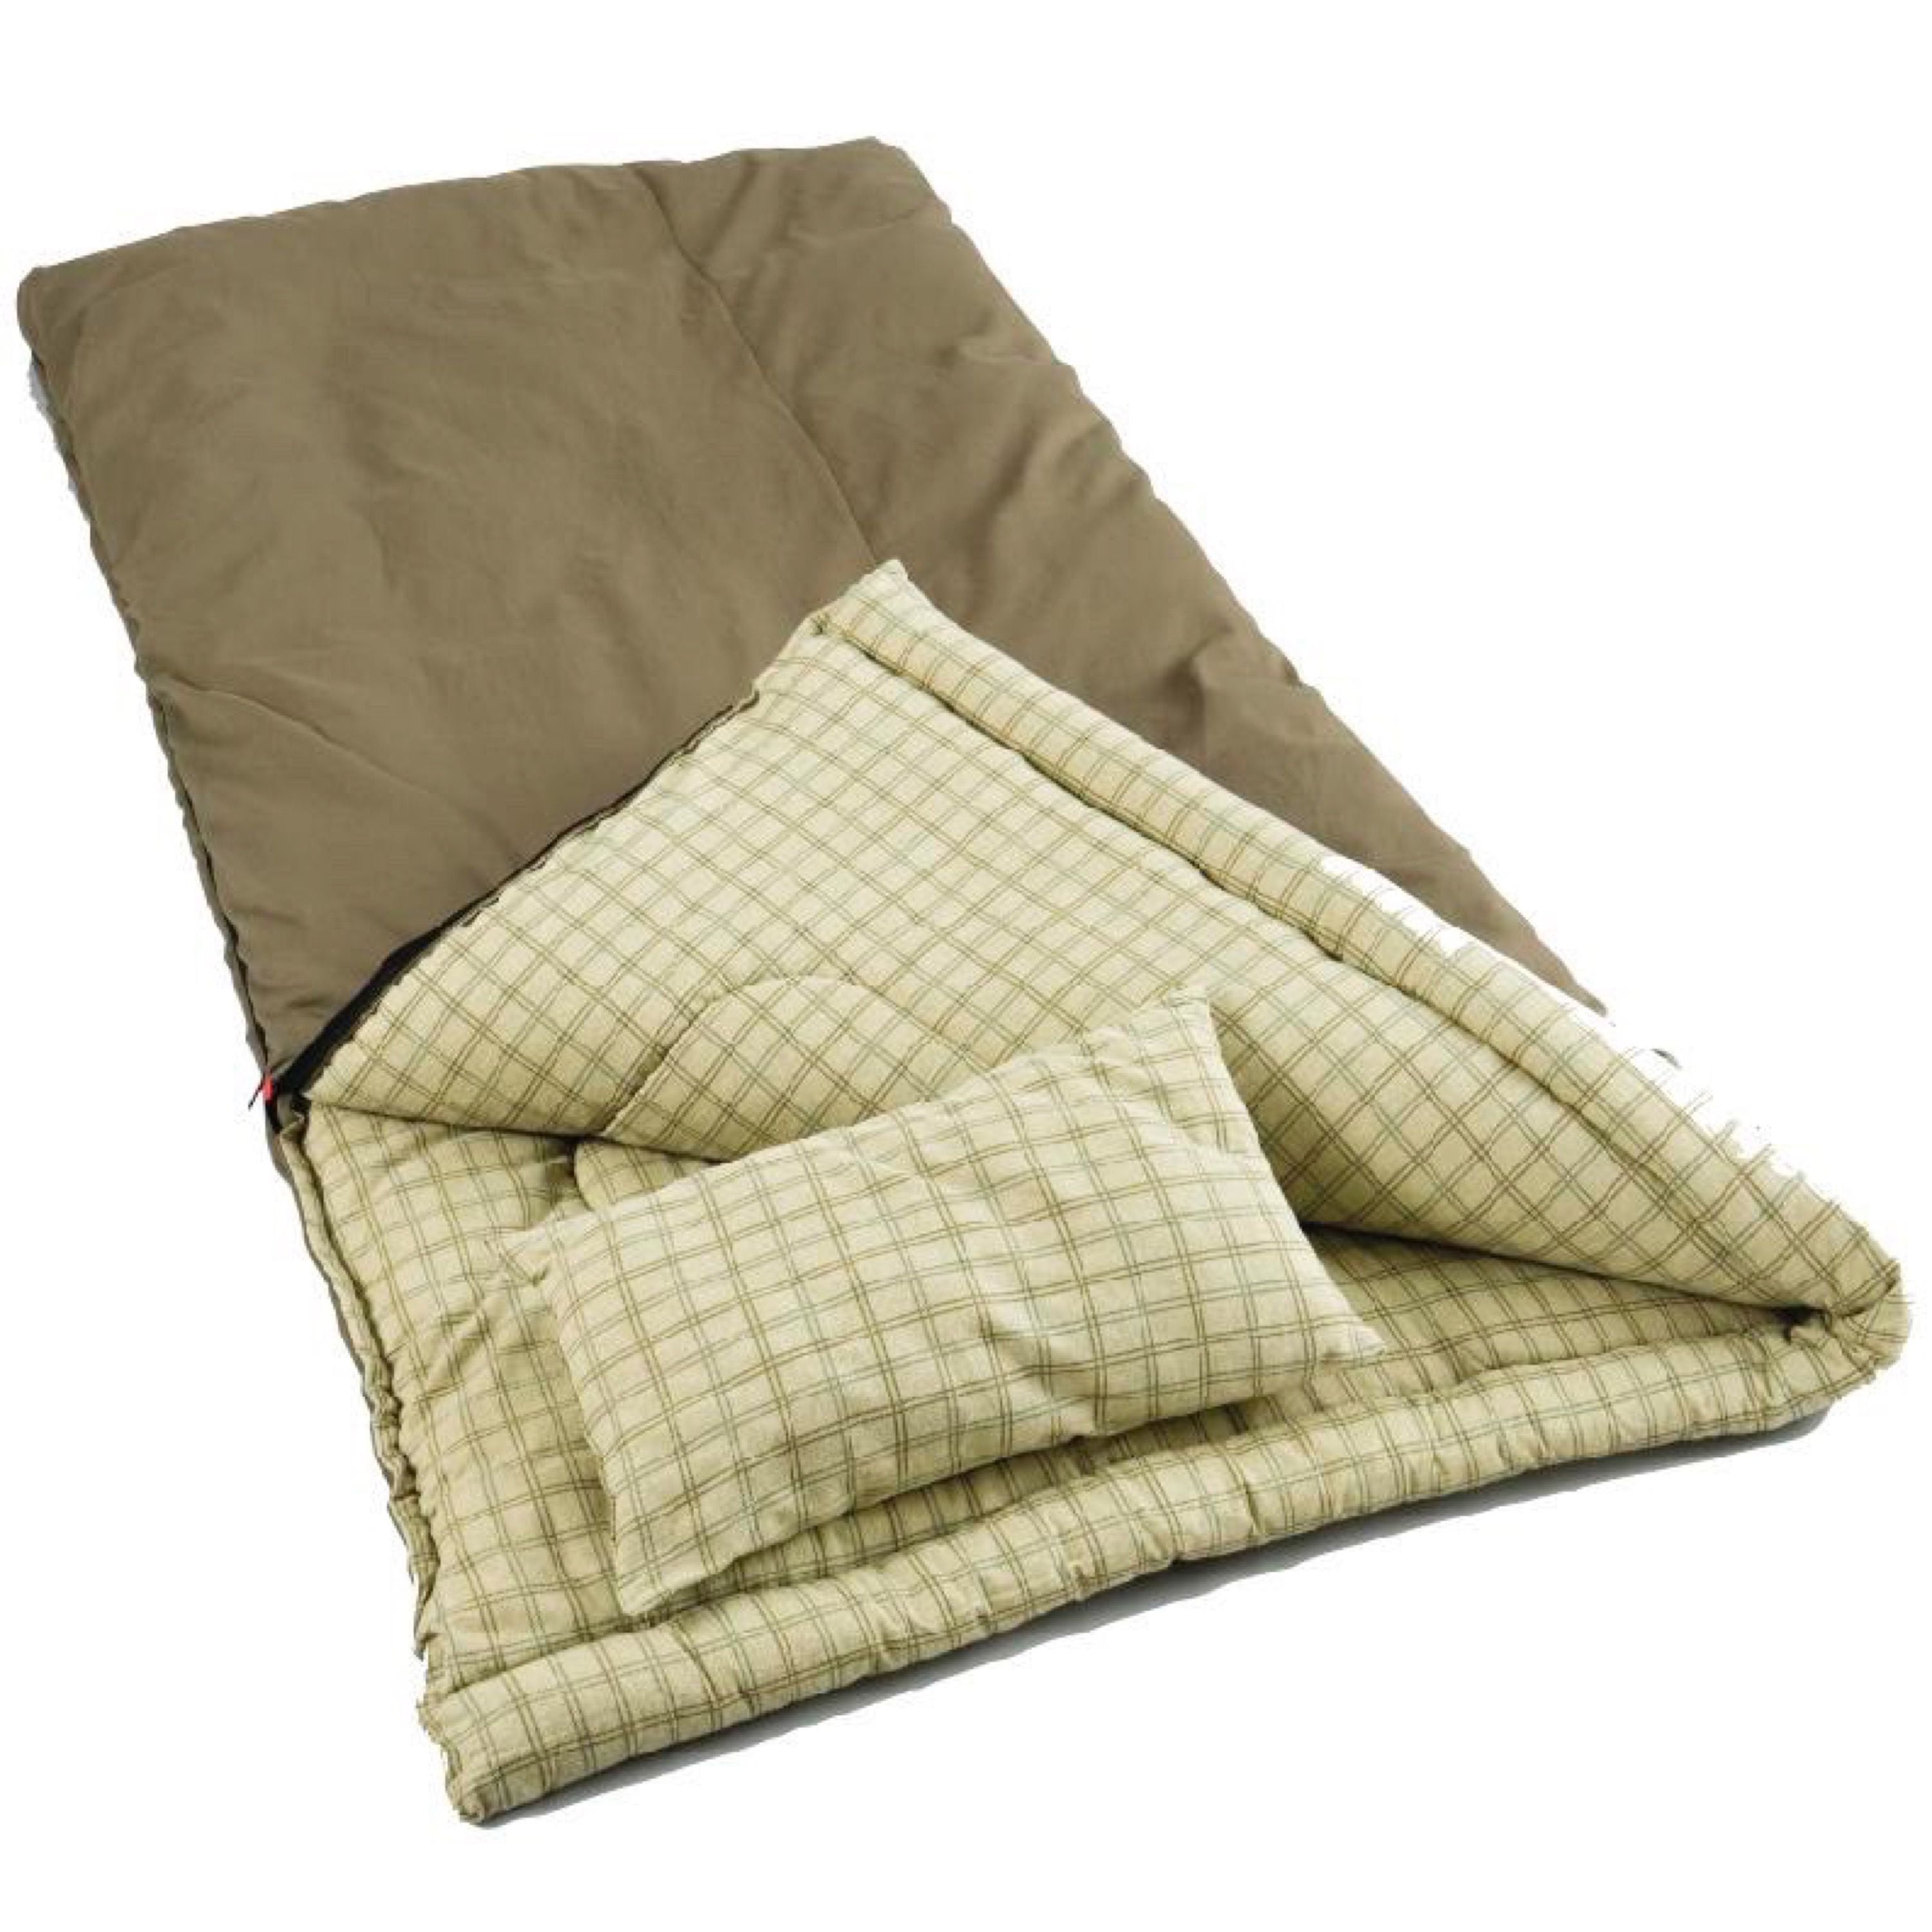 Coleman Dunnock Cold Weather Adult Sleeping Bag,Brown 20 x 11 x 11 inches 